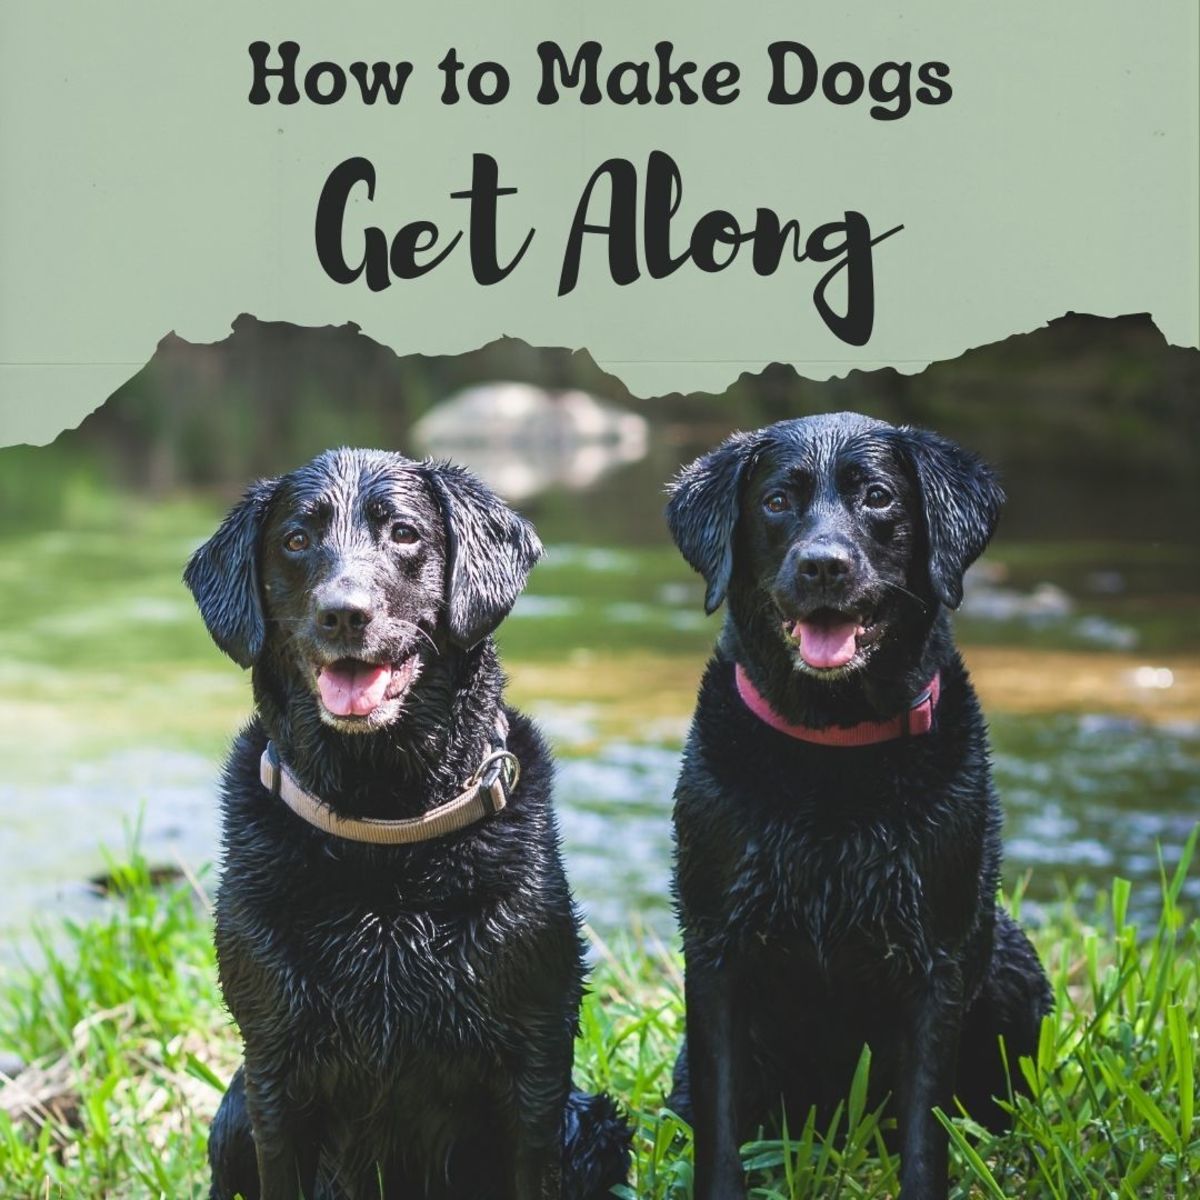 7 Easy Ways to Train a Dog to Get Along With Other Dogs